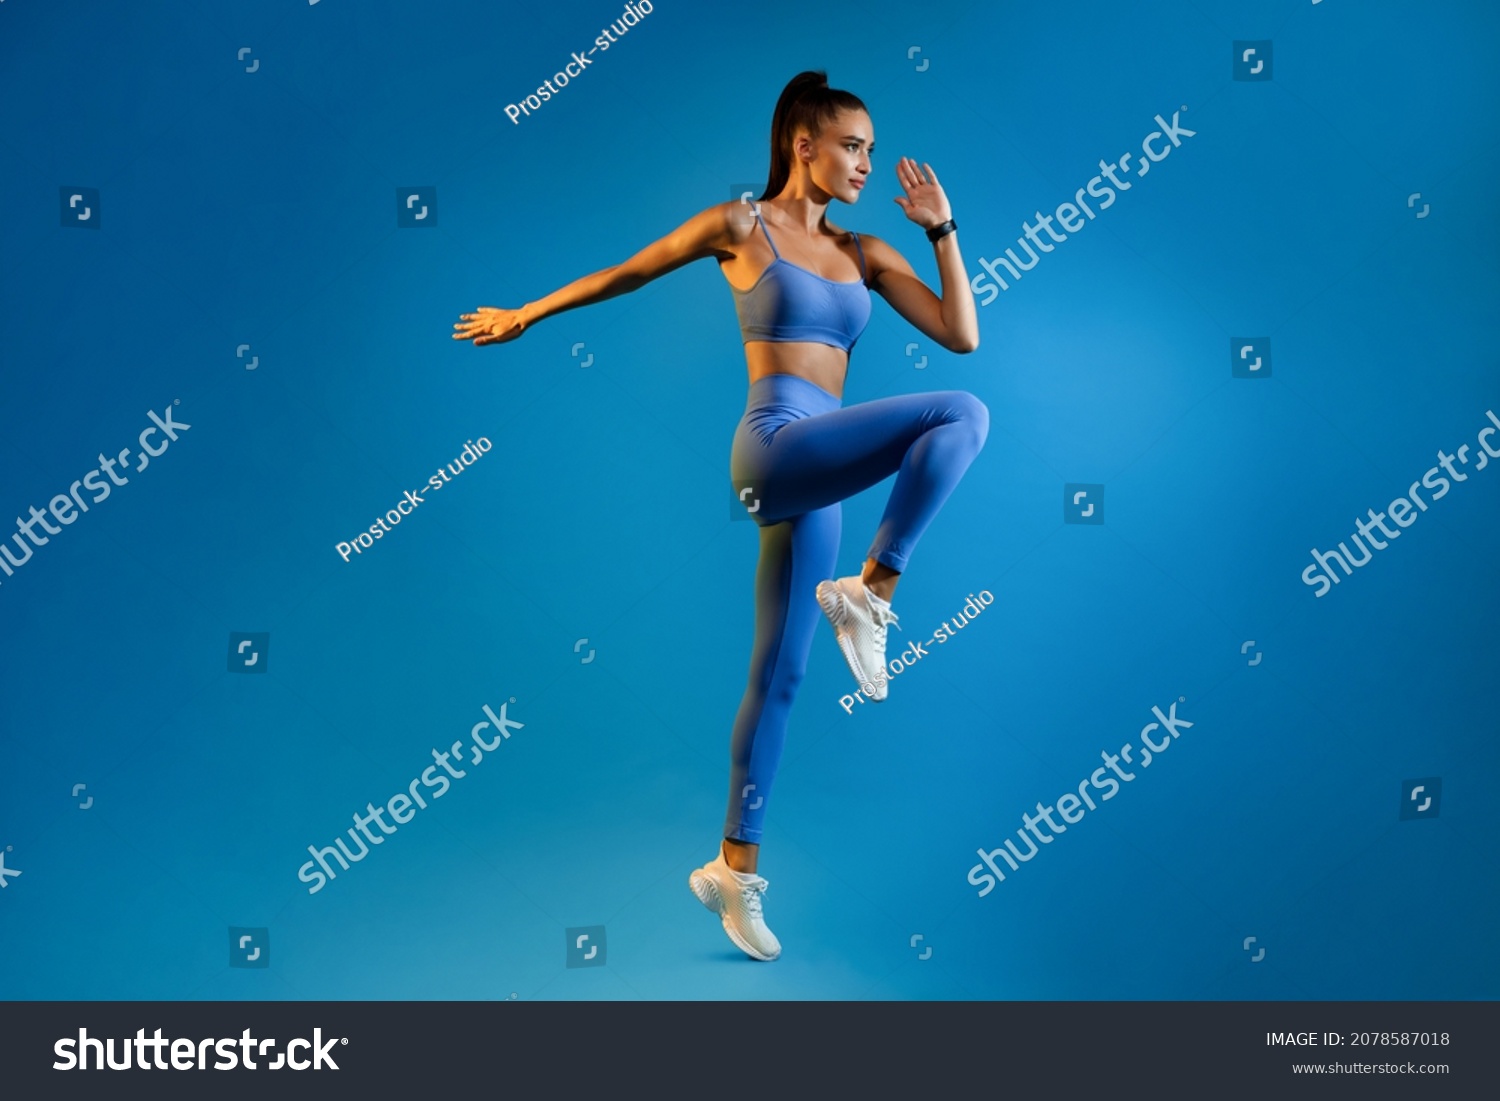 Female Athlete Jumping Exercising During Training Over Blue Studio Background, Looking Aside. Fitness Workout And Sport Motivation Concept. Full Length, Side View #2078587018